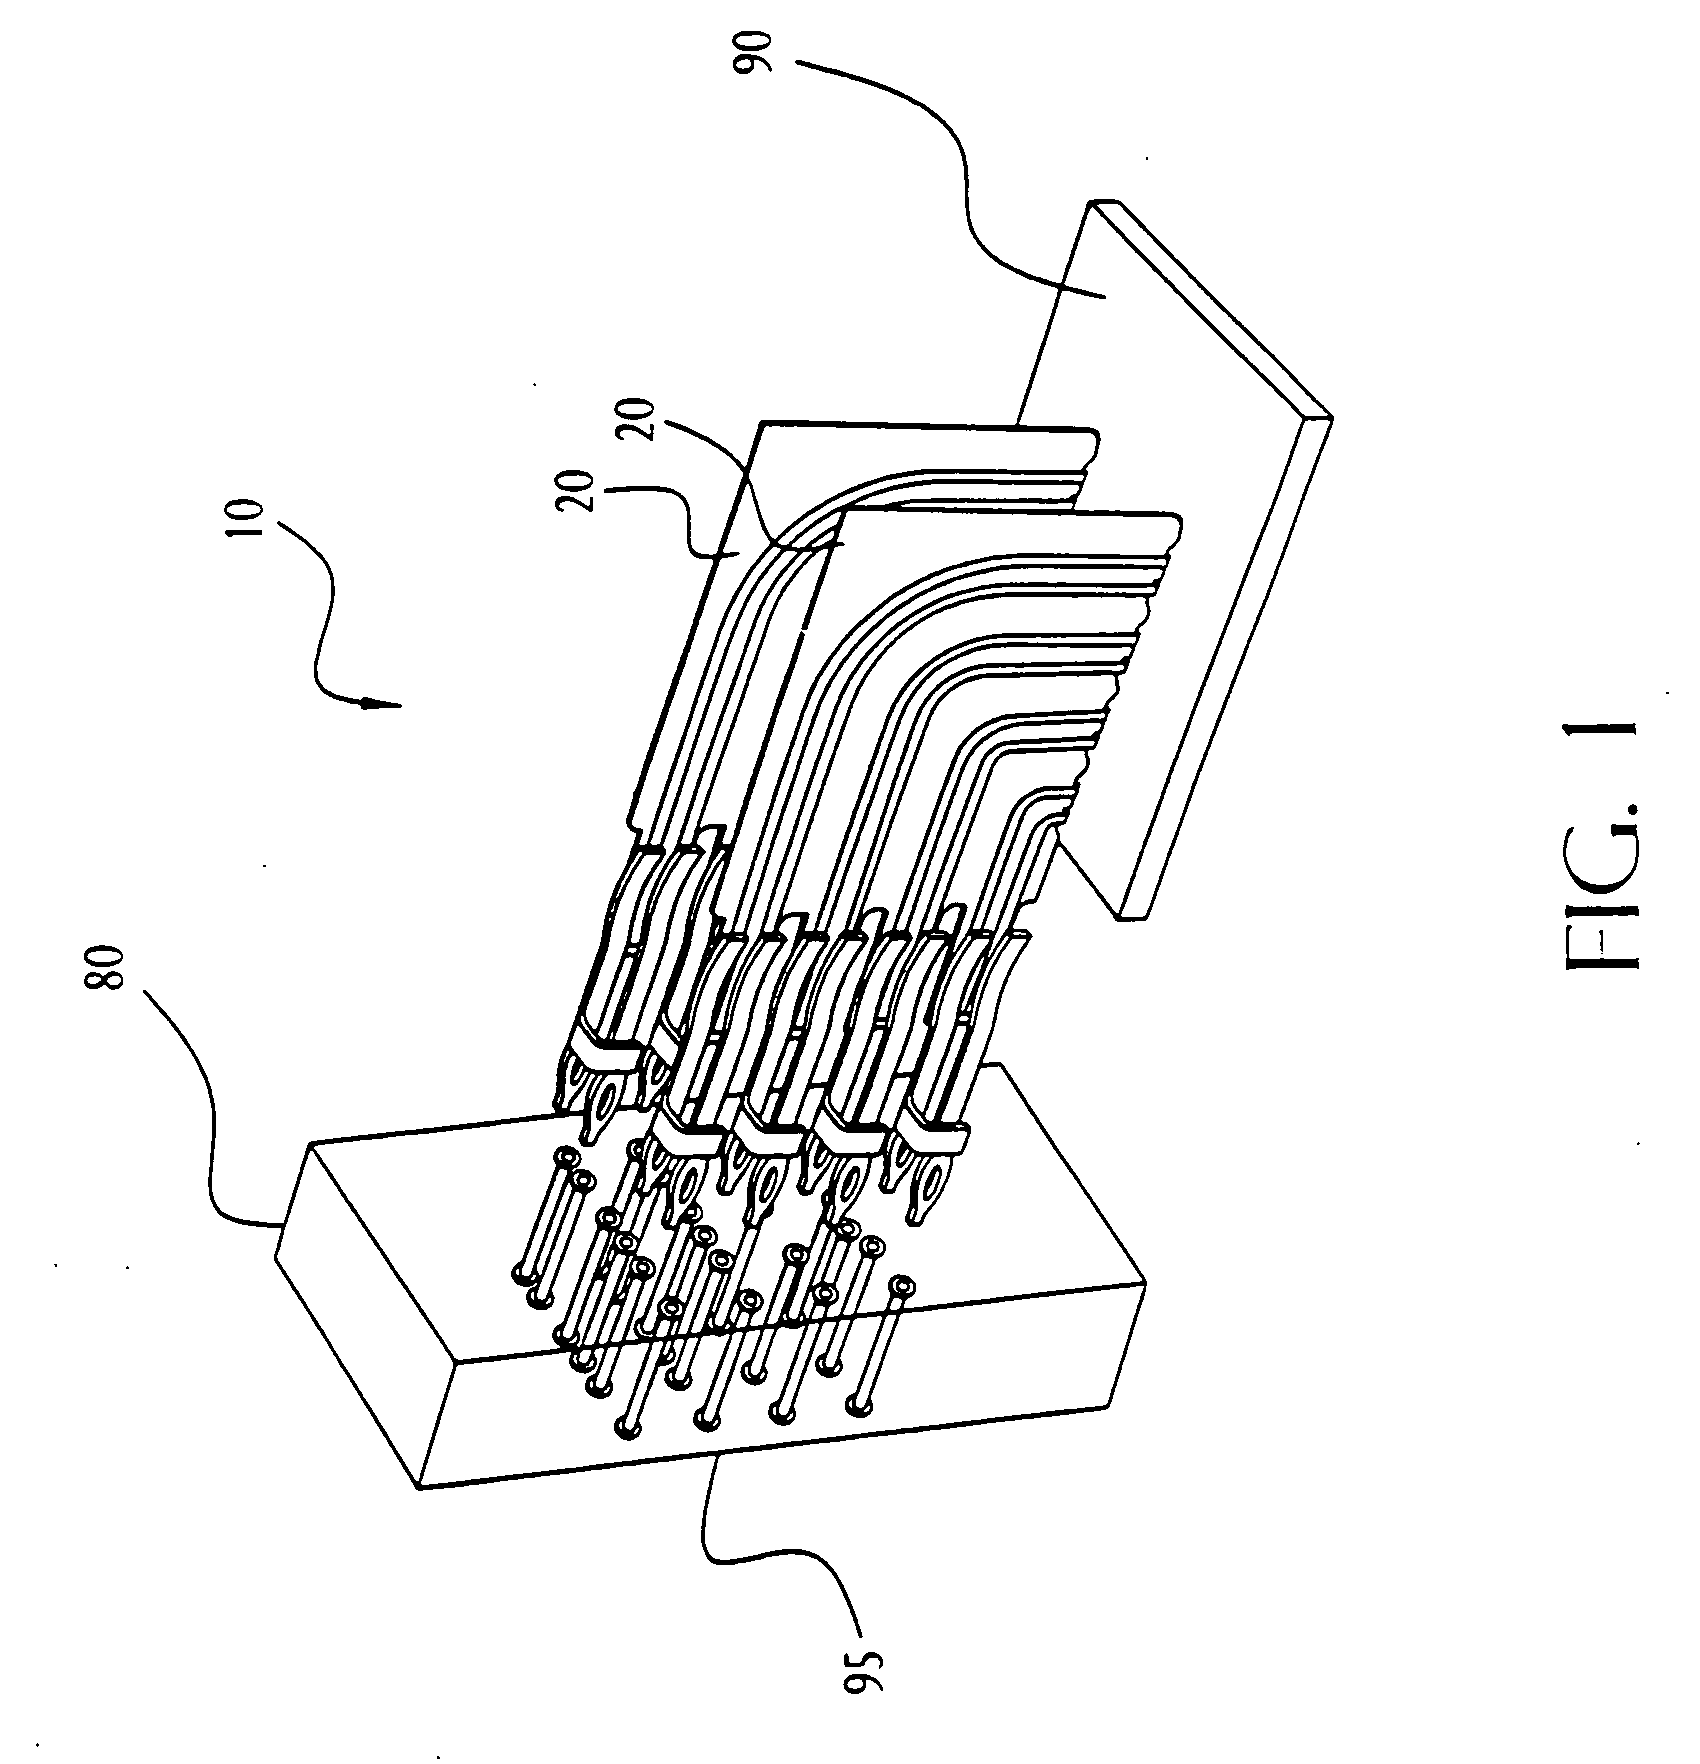 Connector for high-speed communications